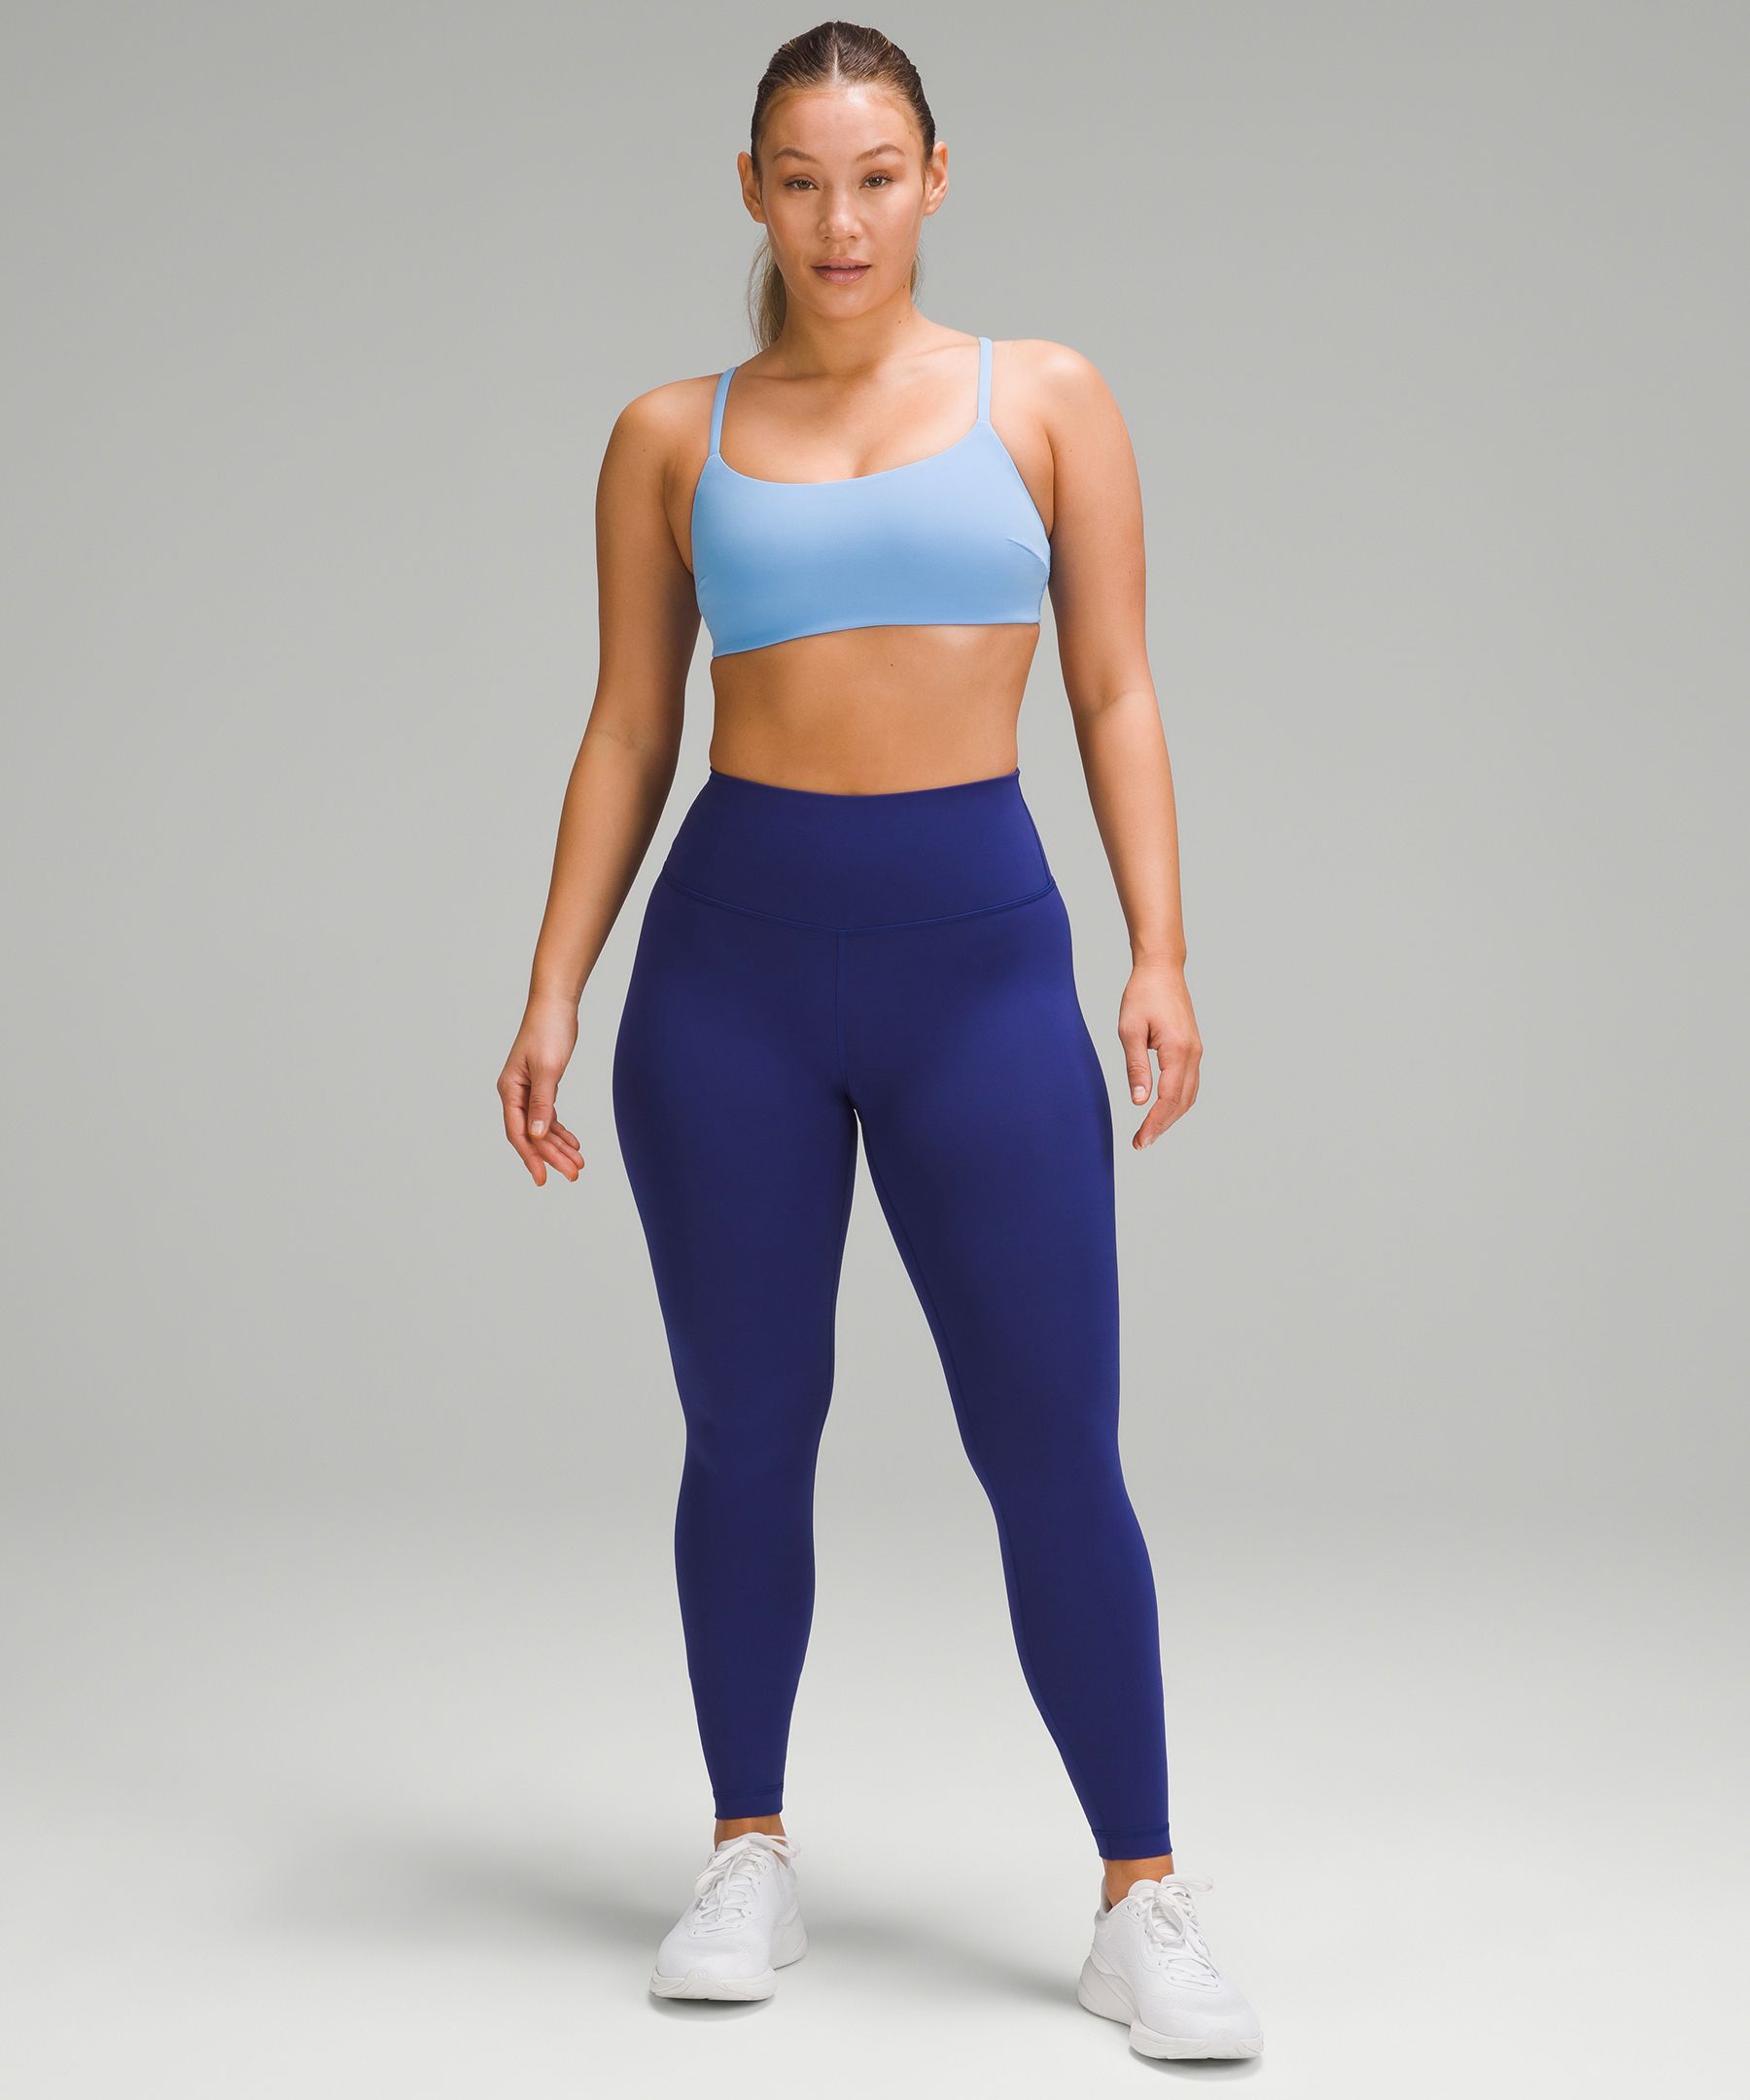 Guardoinrt 2x Add Style To Fitness Routine Wide Range Of Colorful